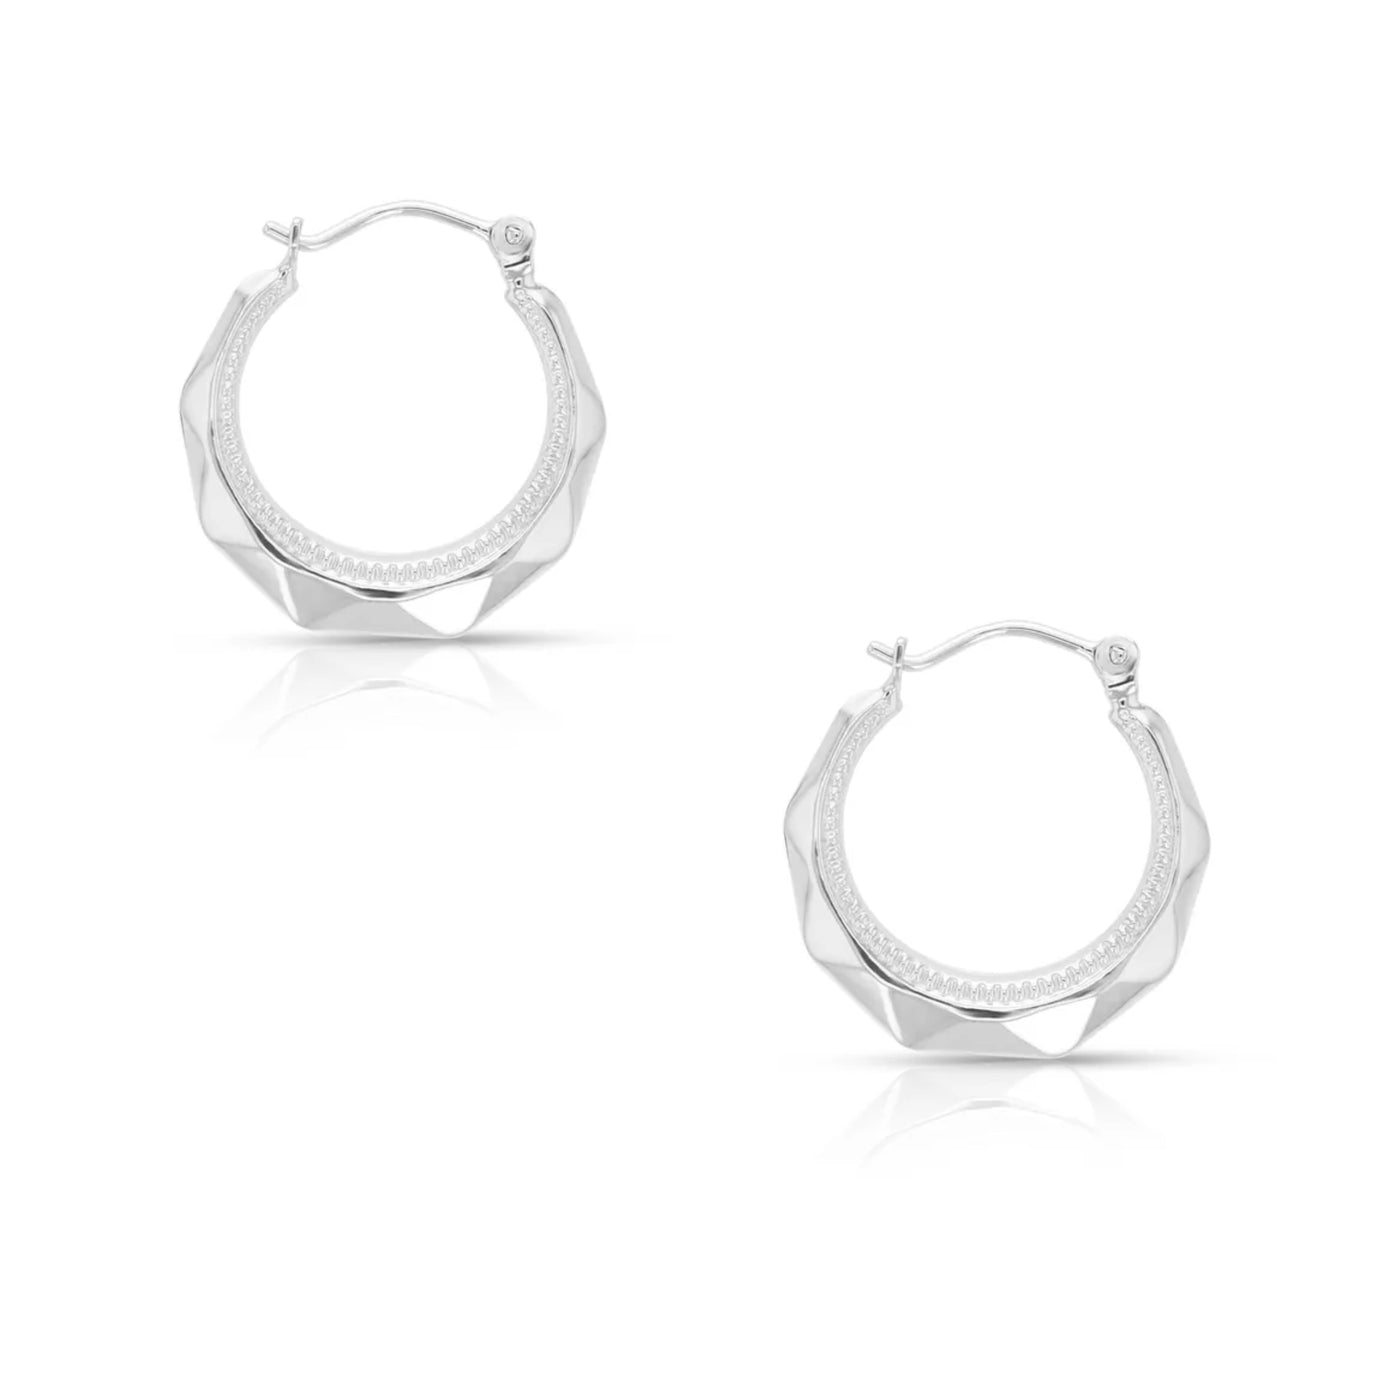 9ct White Gold Faceted Crescent Shape Hoop Earrings.